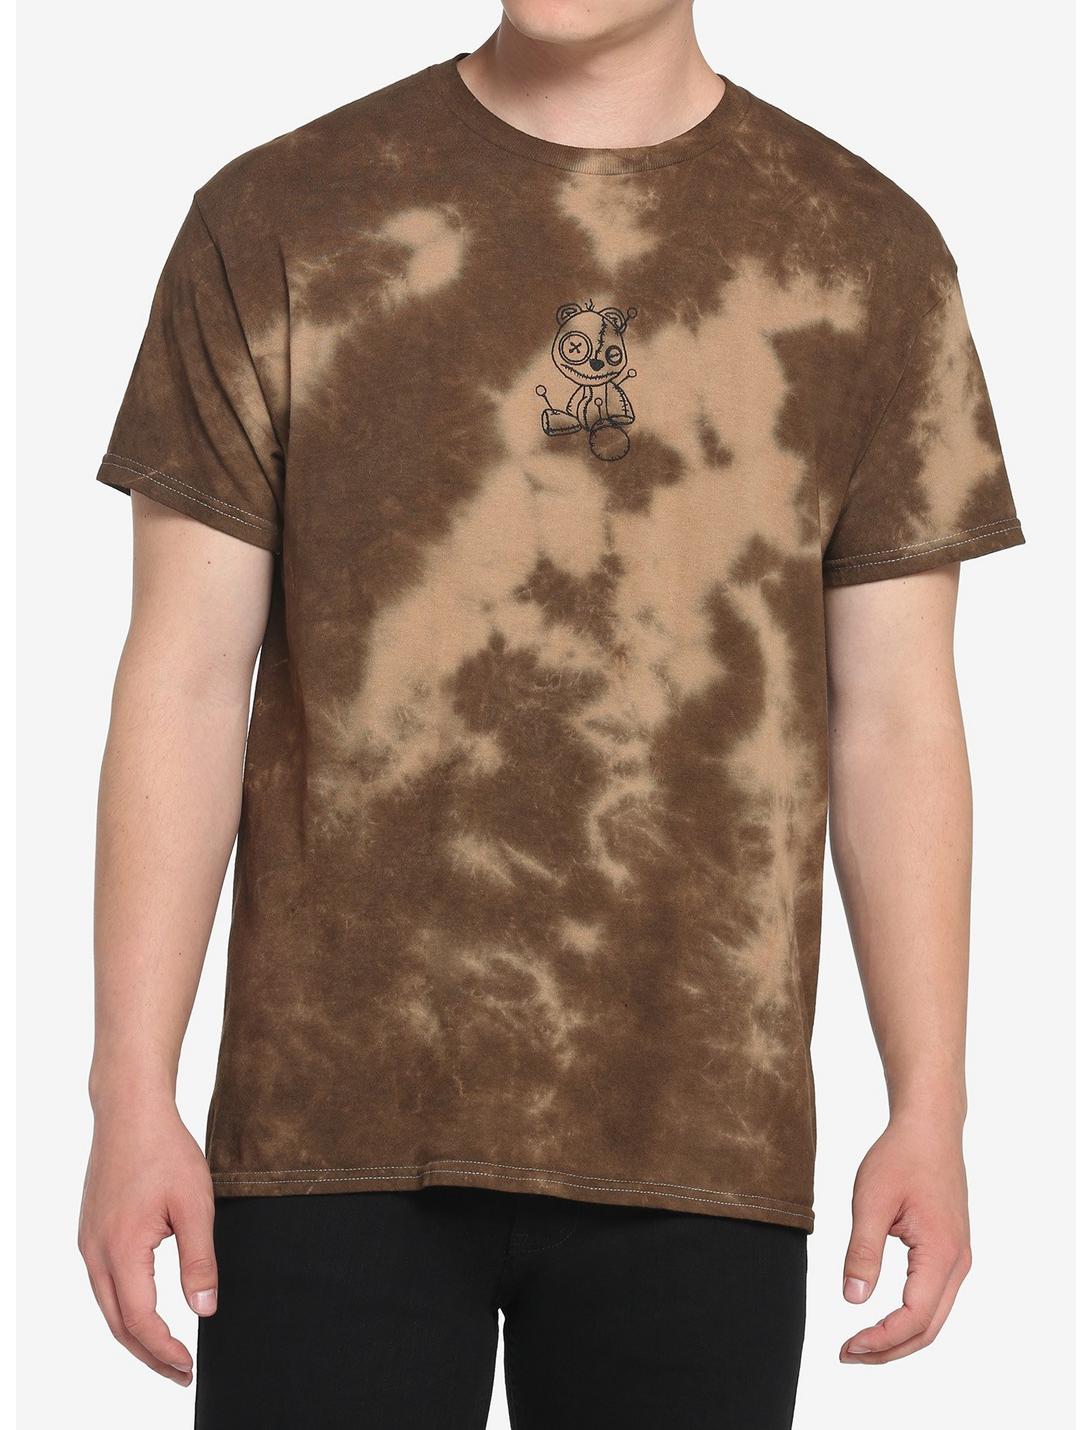 Brown Stitched Teddy Bear Tie-Dye T-Shirt, BROWN, hi-res